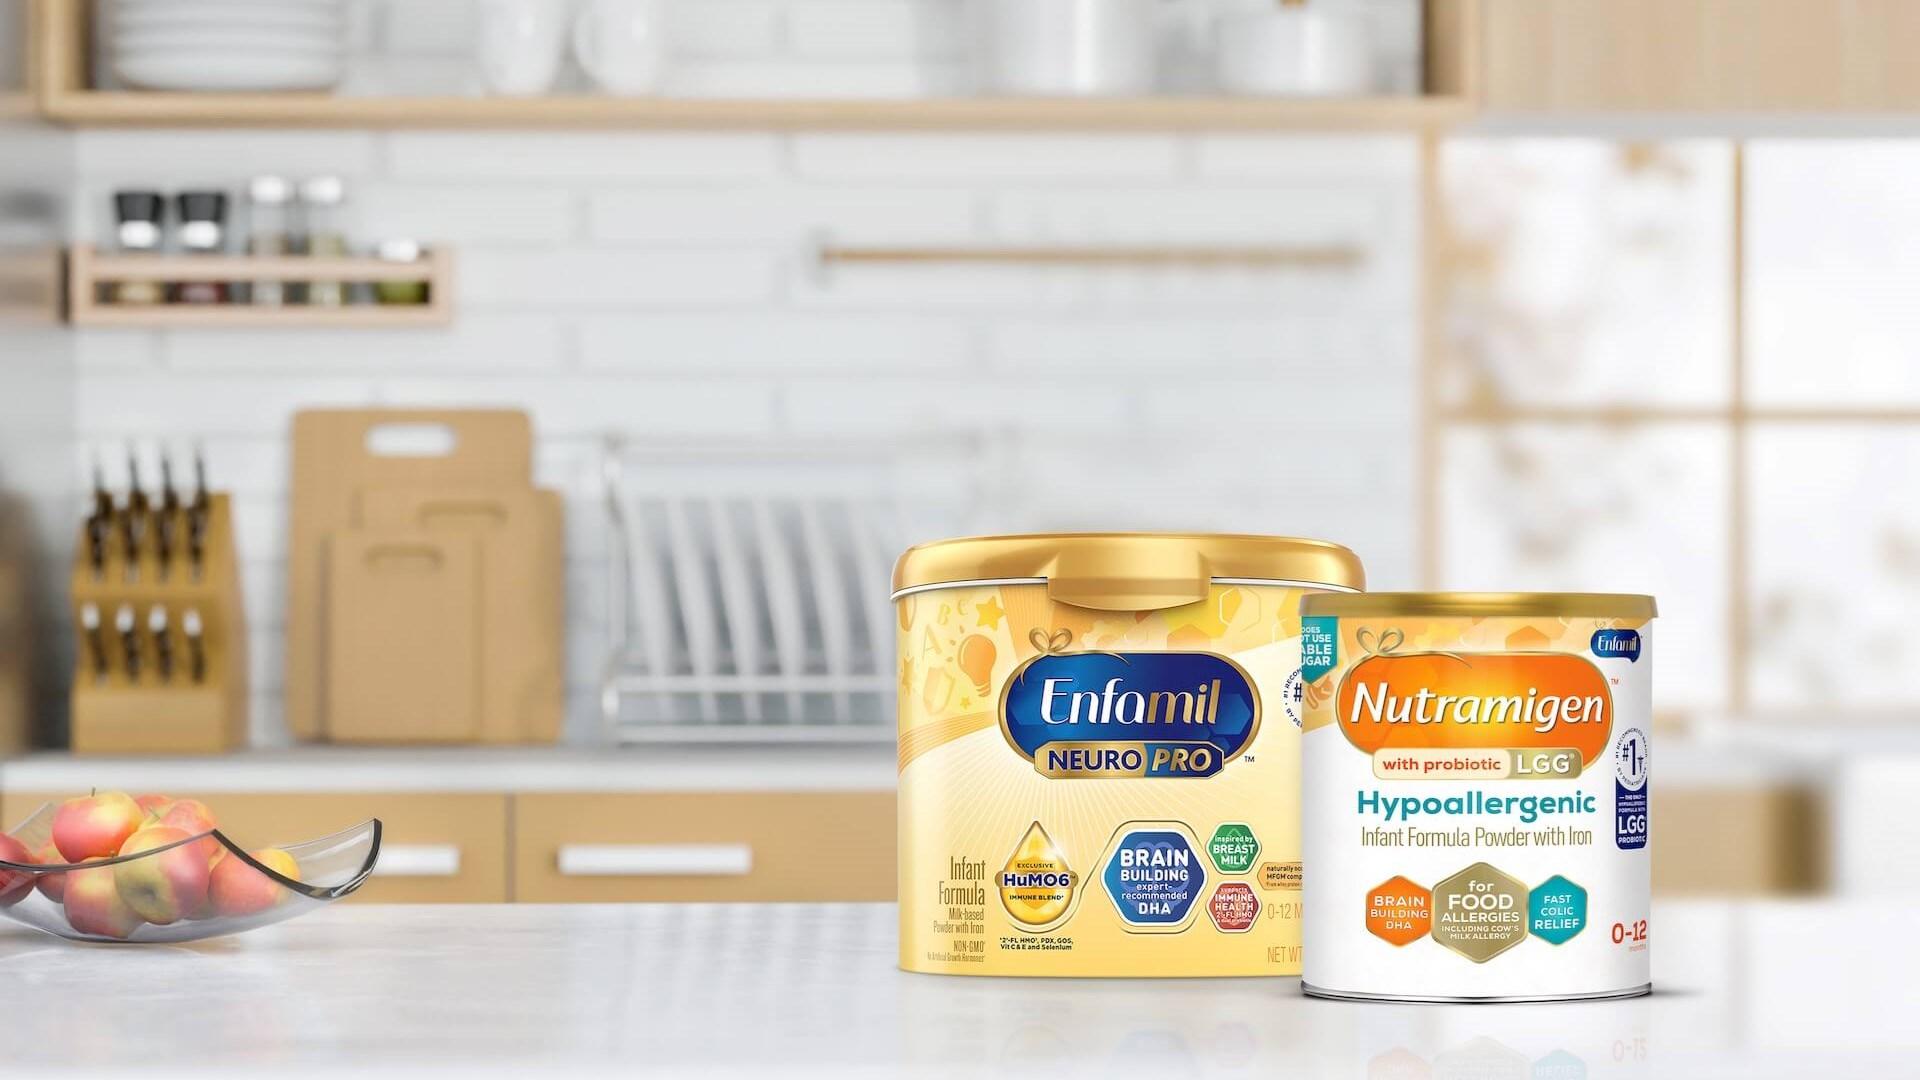 An Enfamil and Nutrimigen product sitting on a kitchen bench